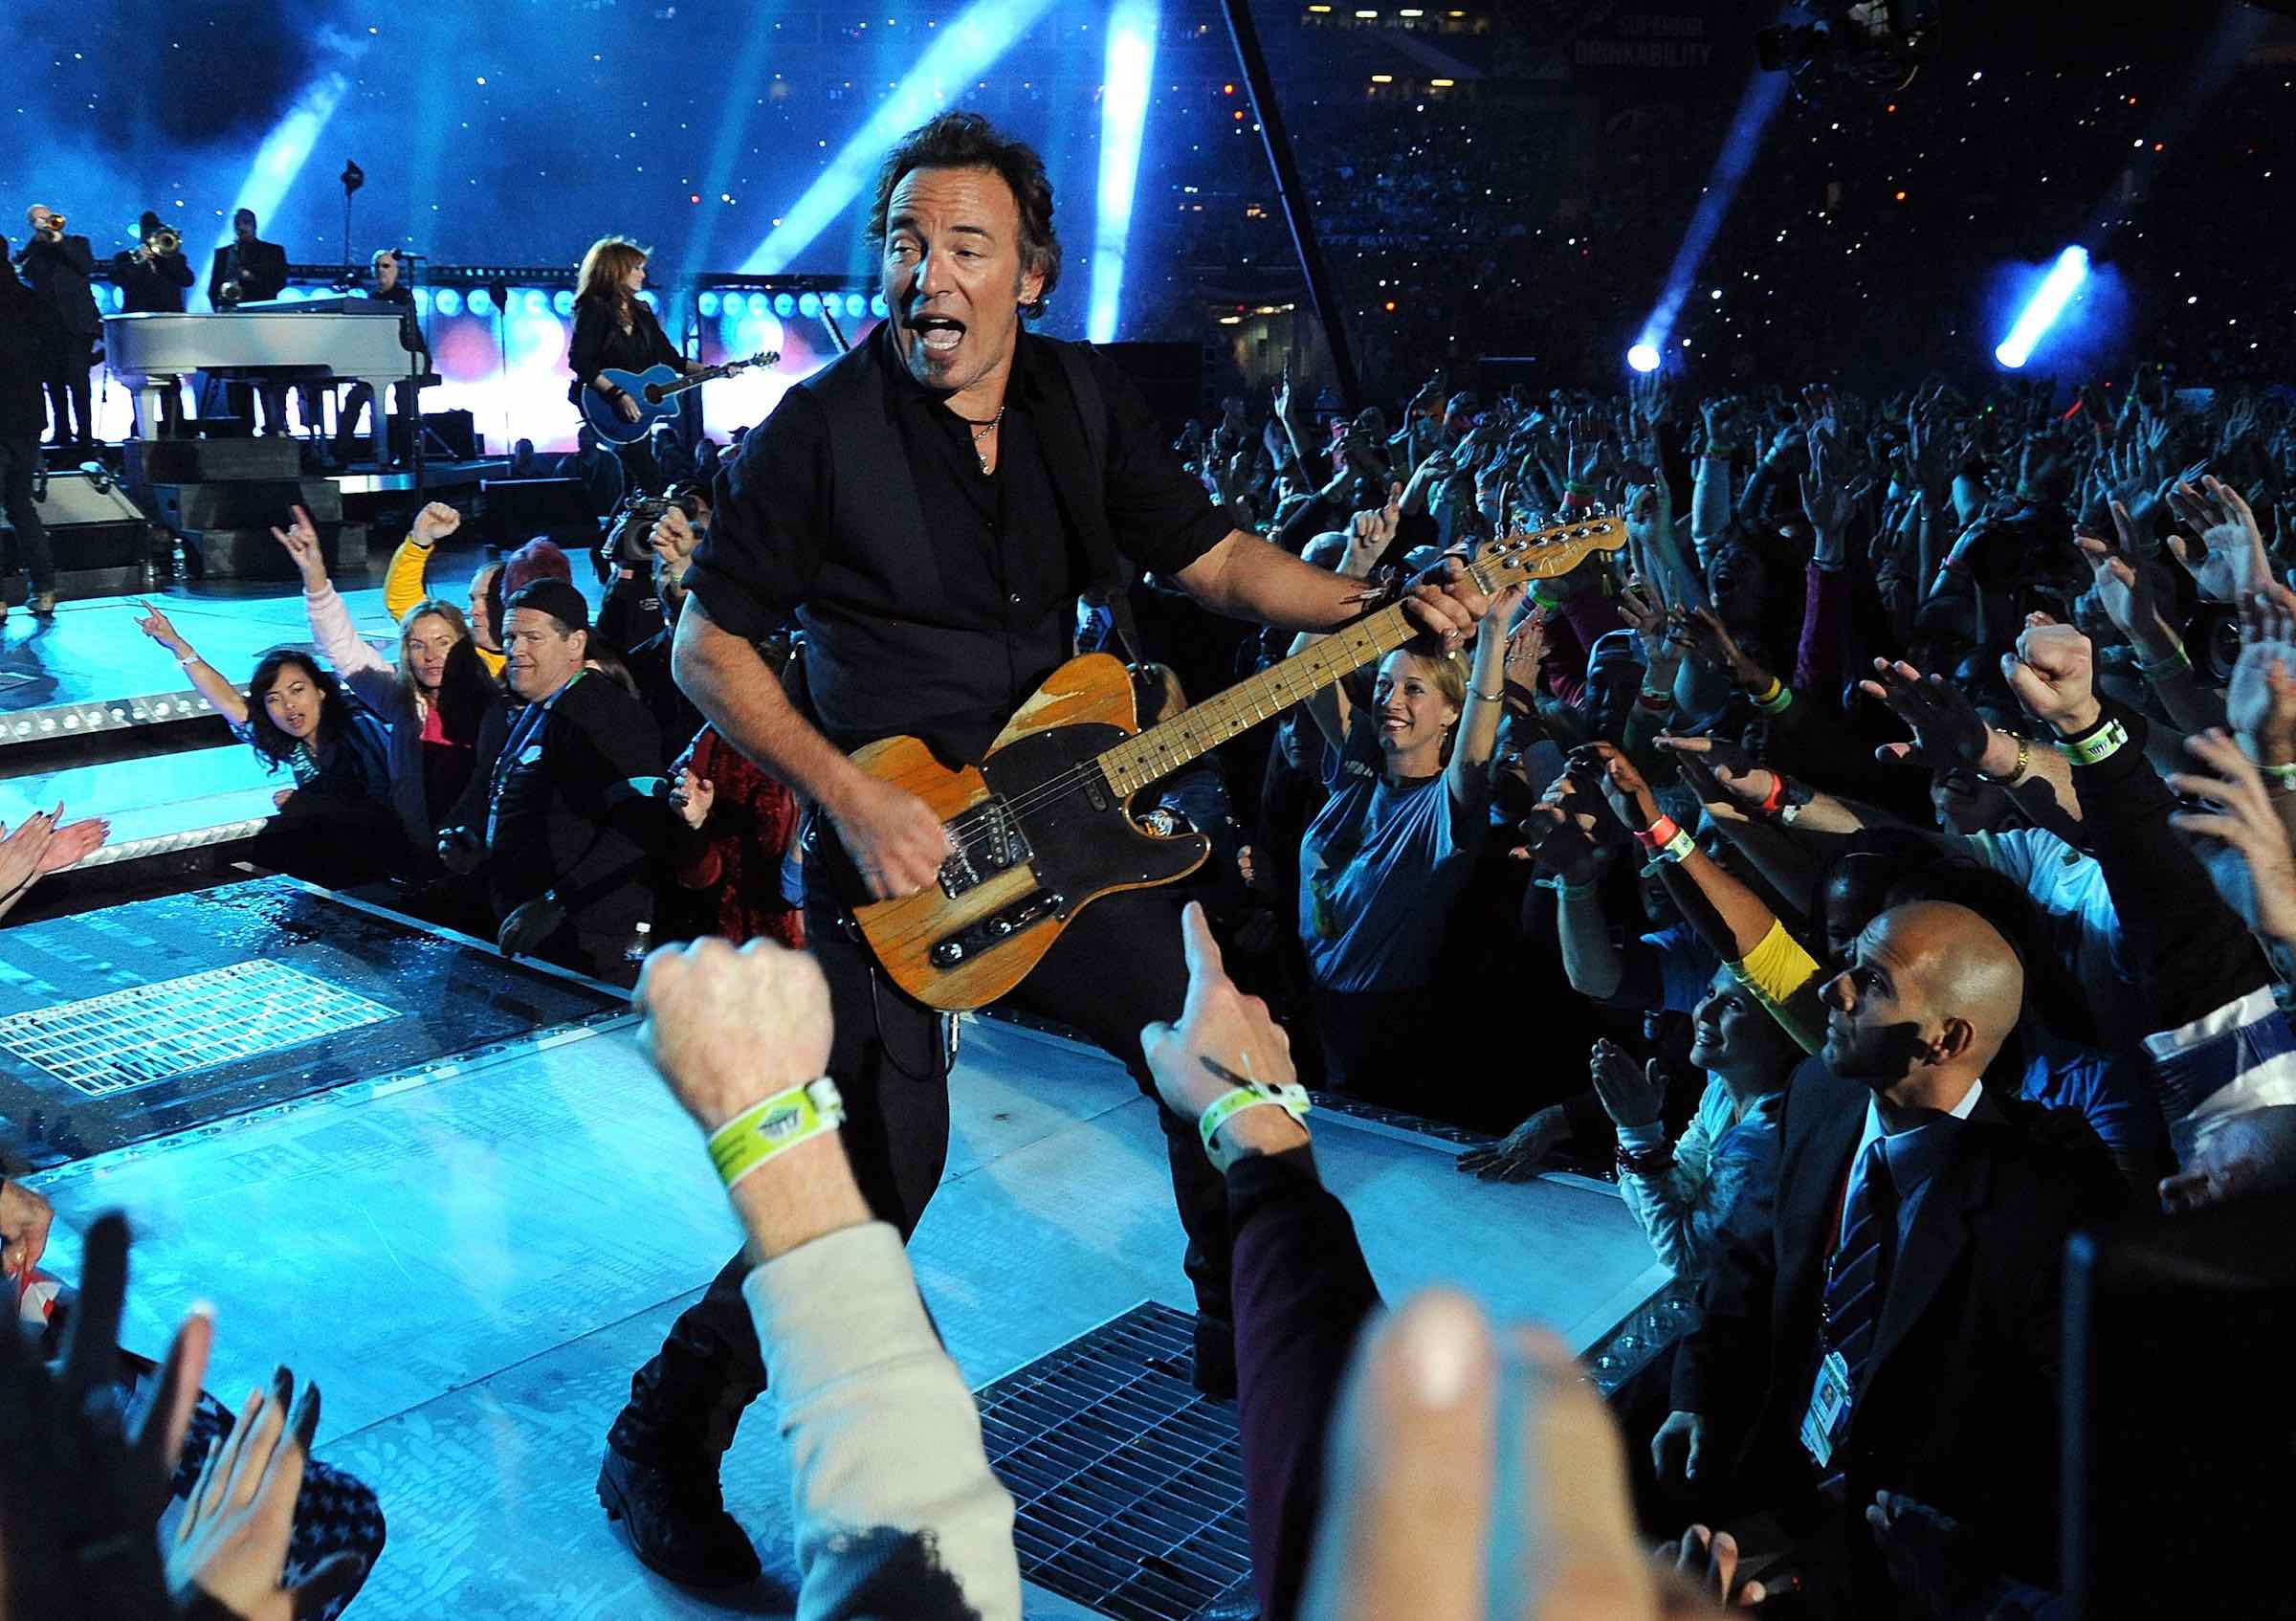 Superbowl halftime show: The most iconic performances over the years